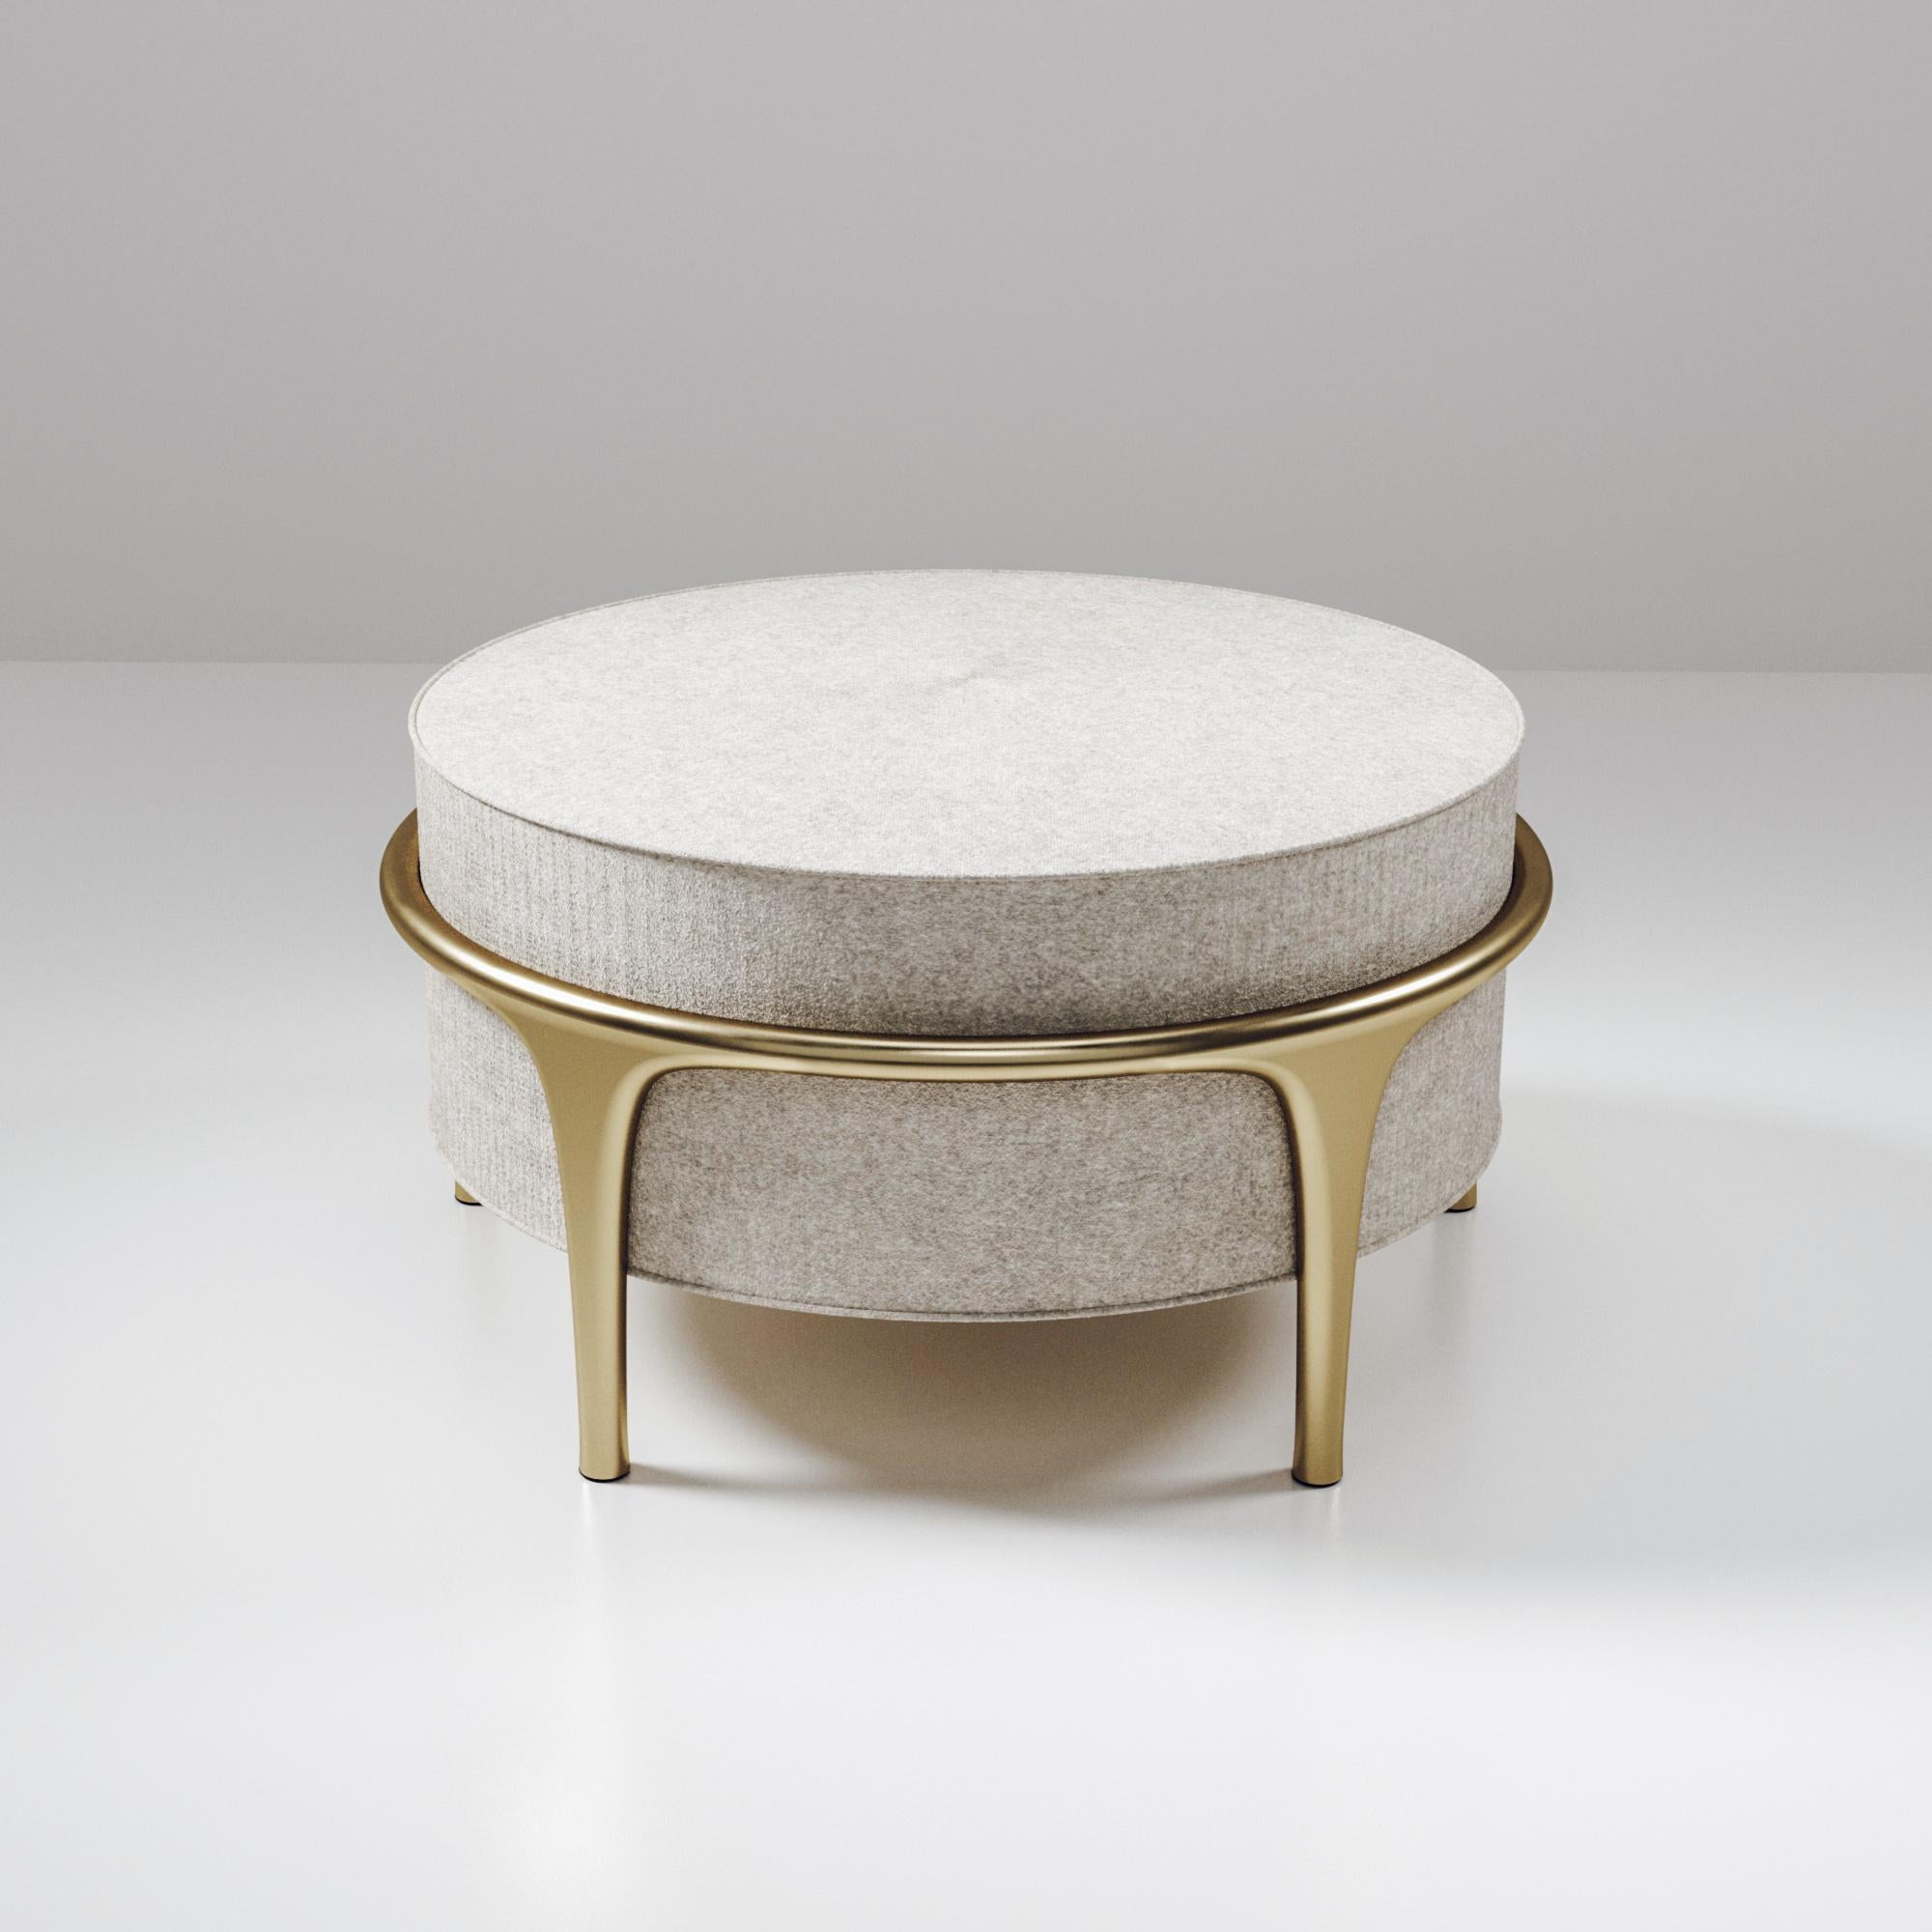 The Ramo ottoman by R & Y Augousti is an elegant and versatile piece. The upholstered piece in cream Pierre Frey fabric provides comfort while retaining a unique aesthetic with the bronze-patina brass frame and details. This listing is priced for